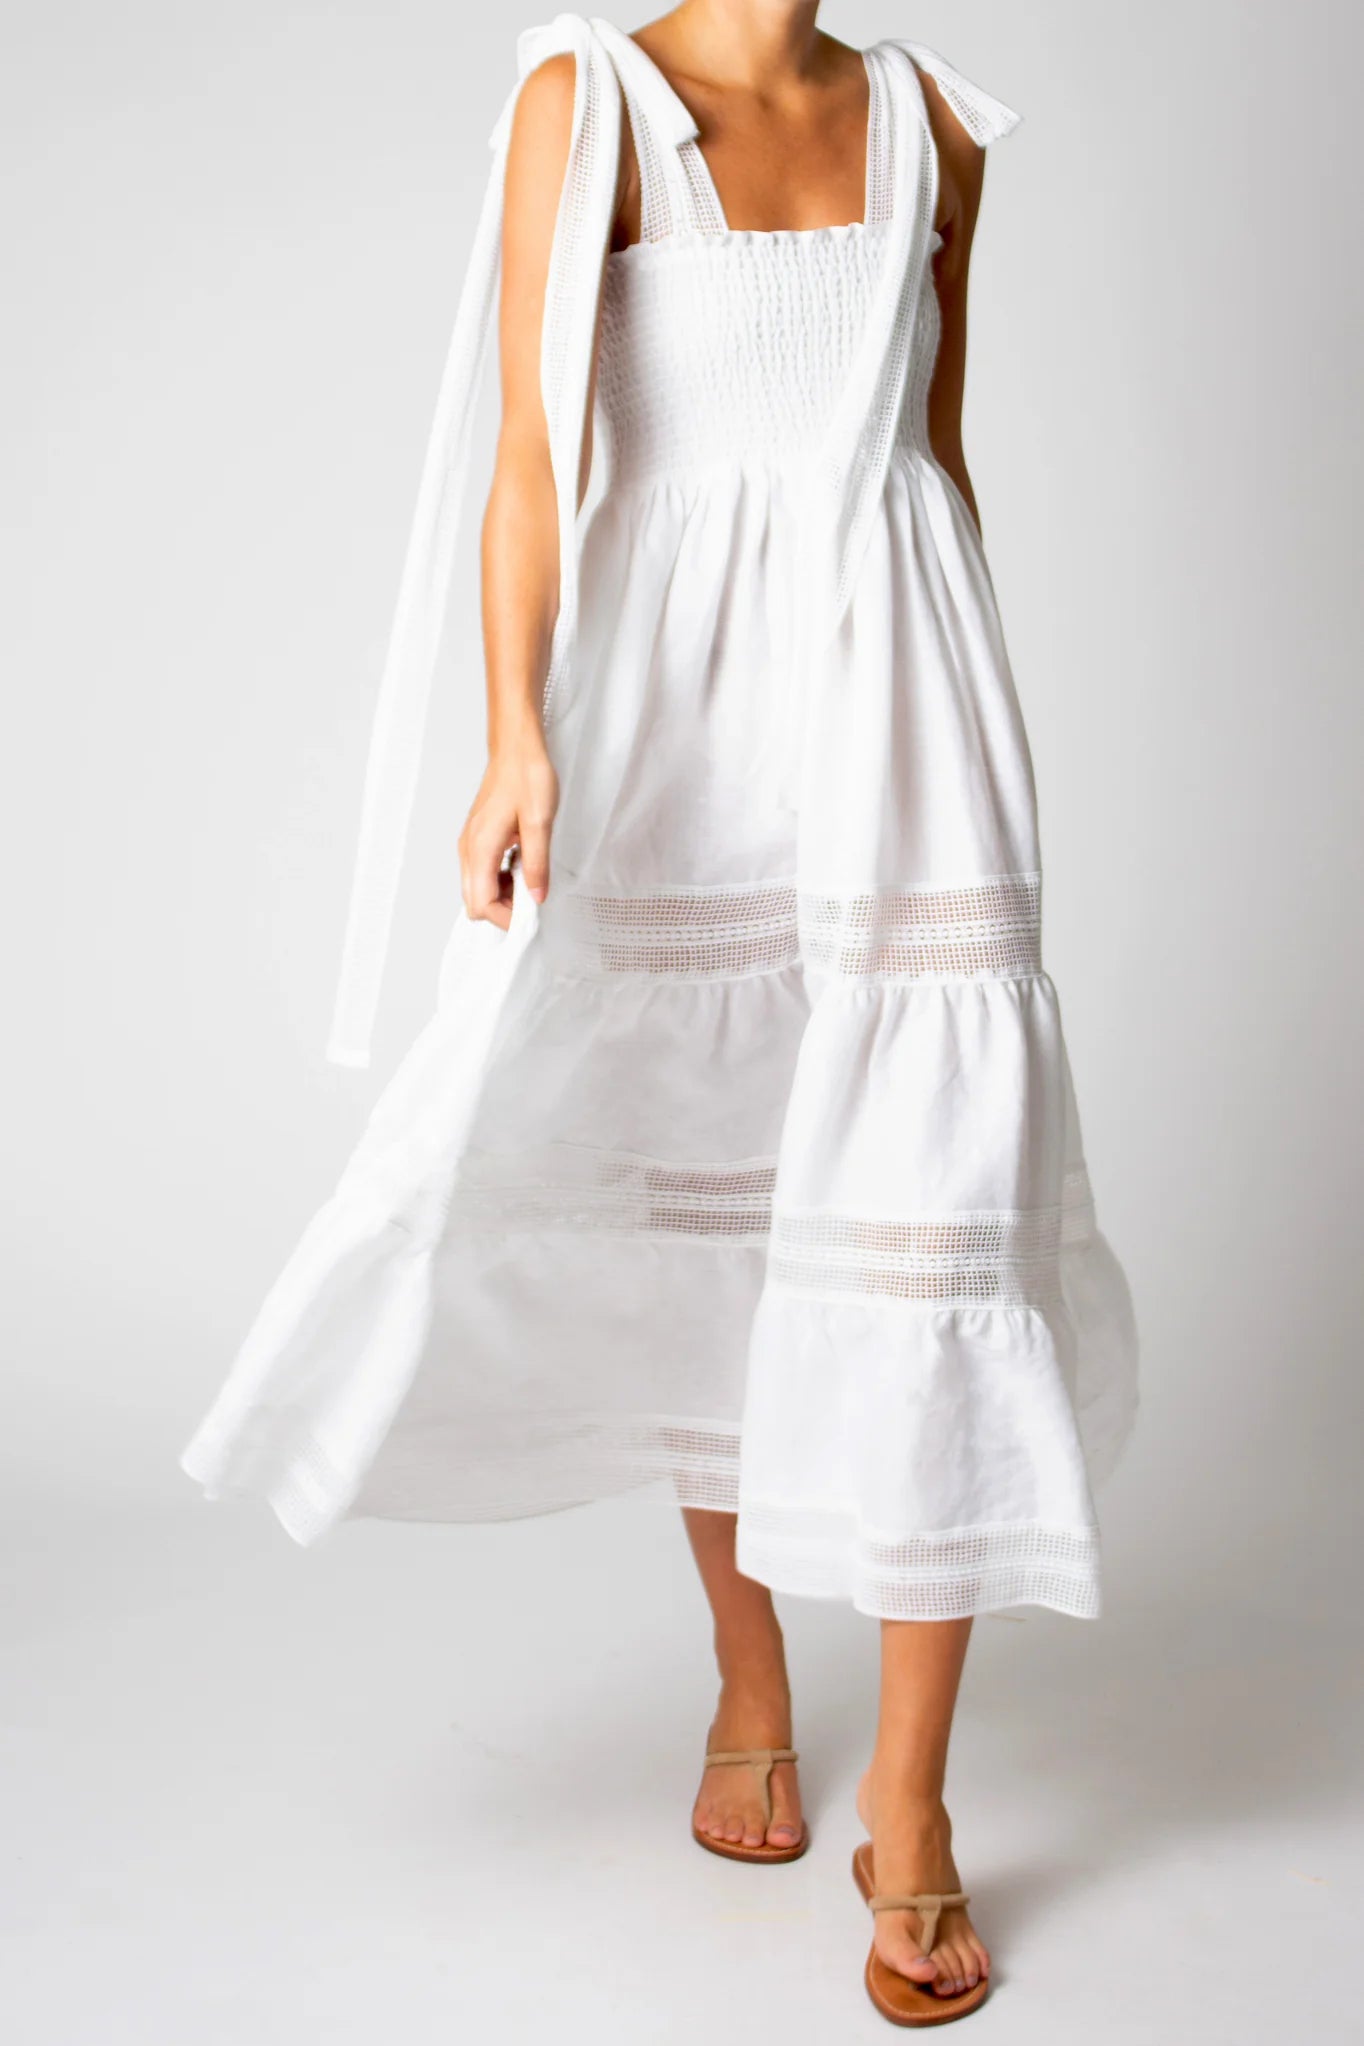 Addy Washed Linen Dress by Miguelina